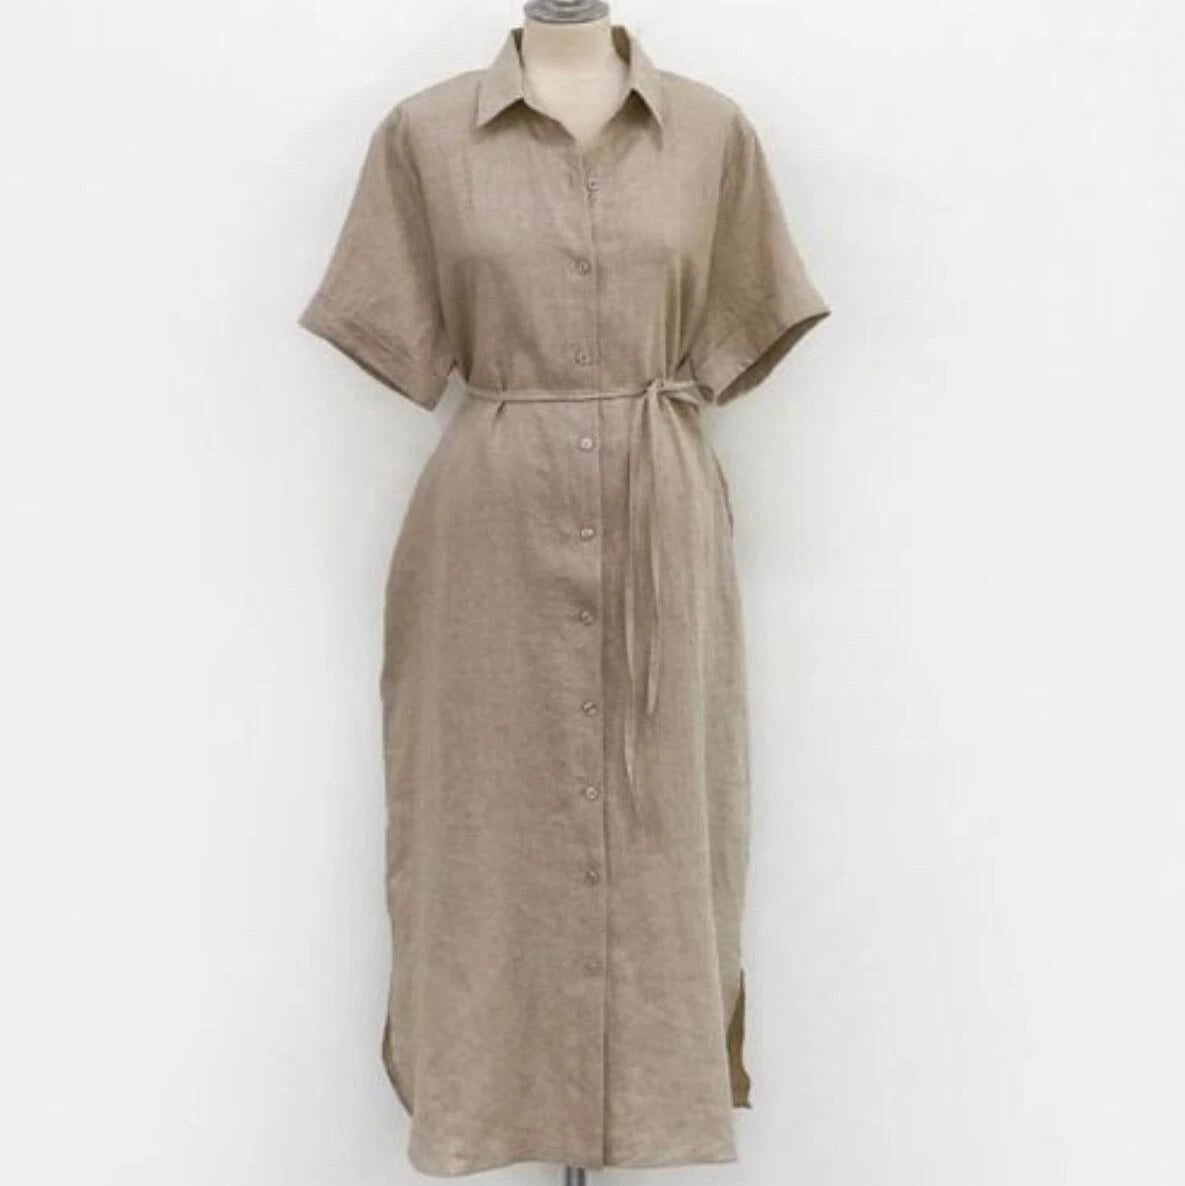 Classic lace-up waist single-breasted short-sleeved shirt dress